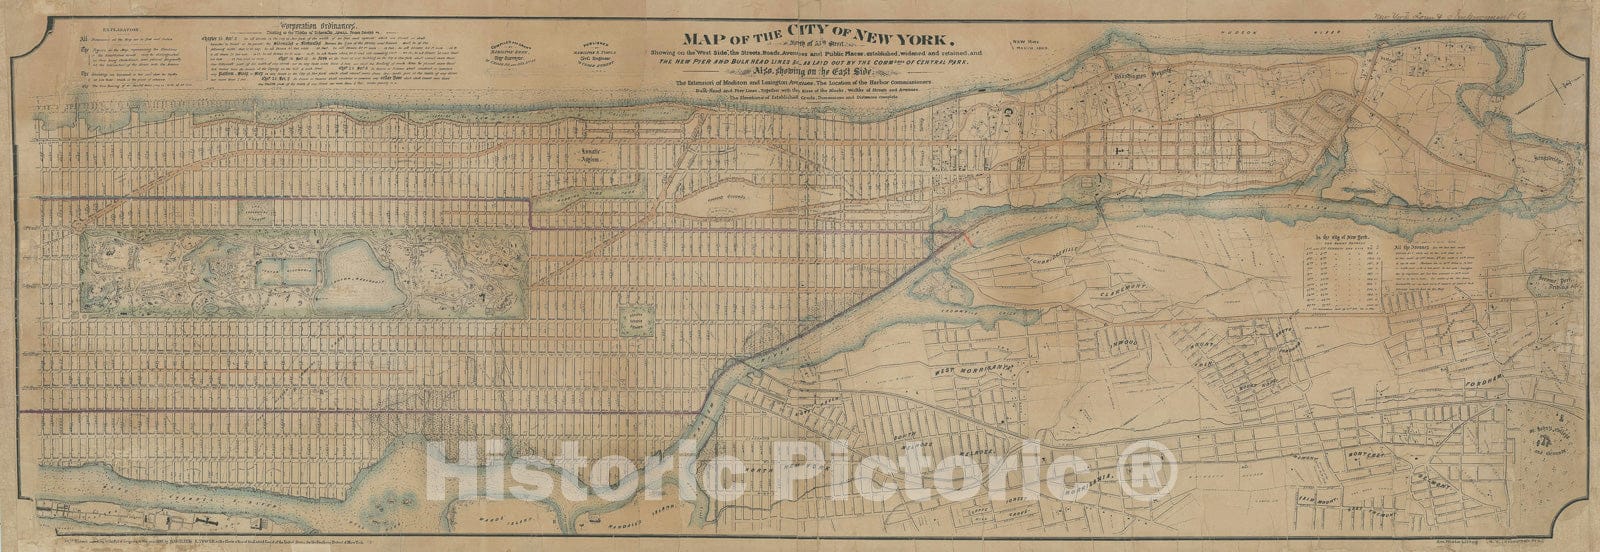 Historic Map : Manhattan, New York City, North of 55th St., Ewen - Towle, 1869, Vintage Wall Art